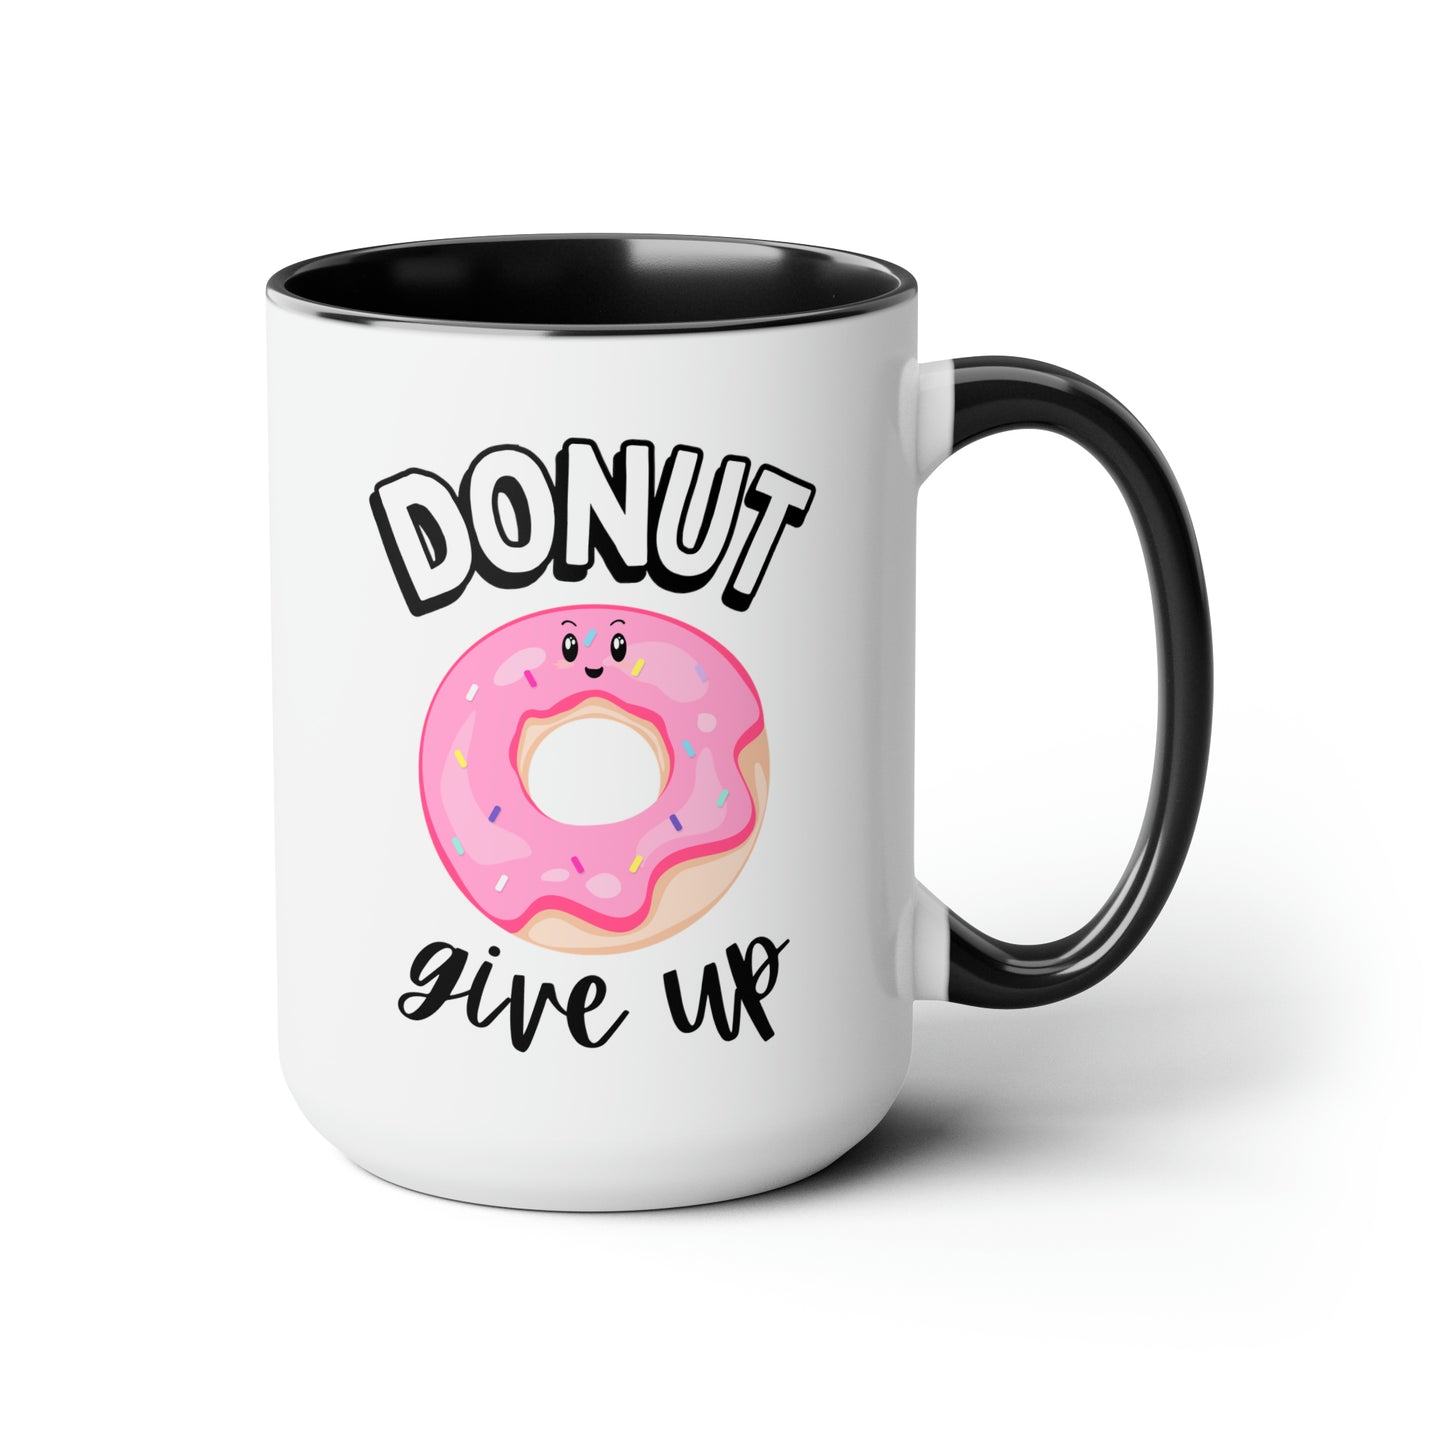 Donut Give Up 15oz white with black accent funny large coffee mug gift for foodie her cute food pun motivational inspirational mother's day waveywares wavey wares wavywares wavy wares